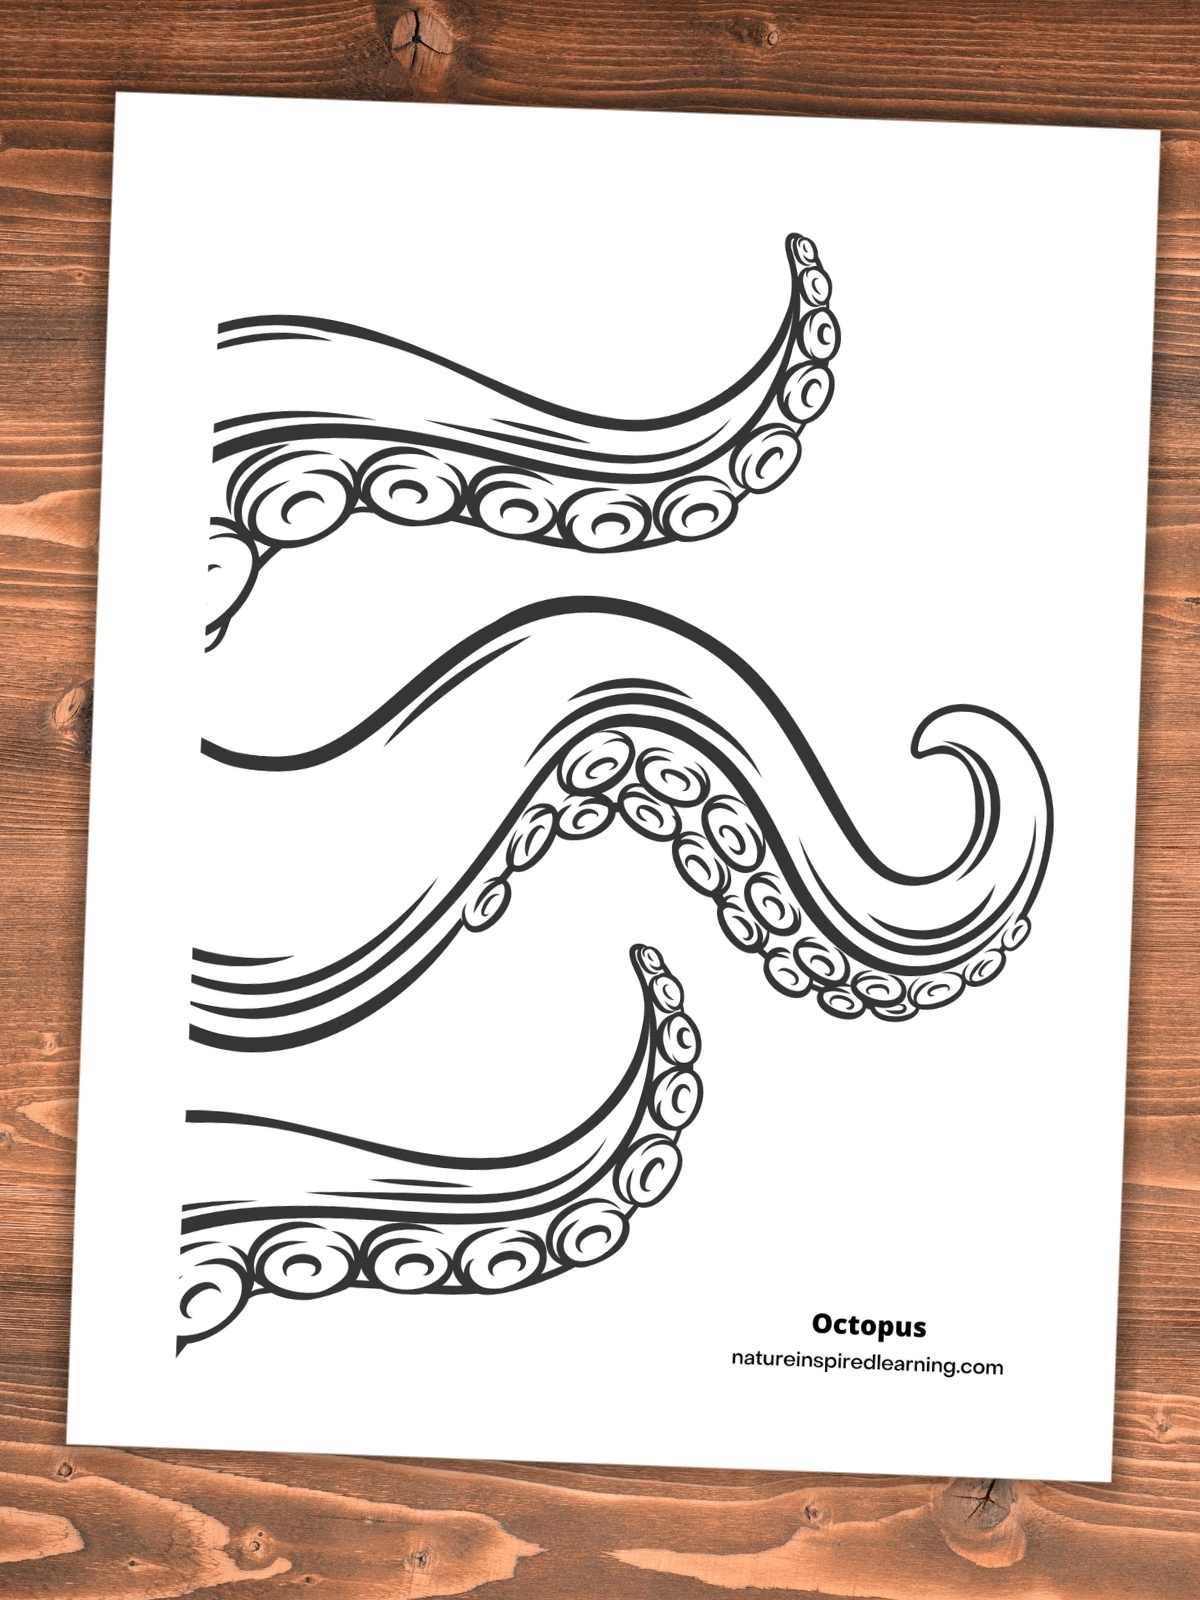 printable with three black and white octopus arms on a wooden background